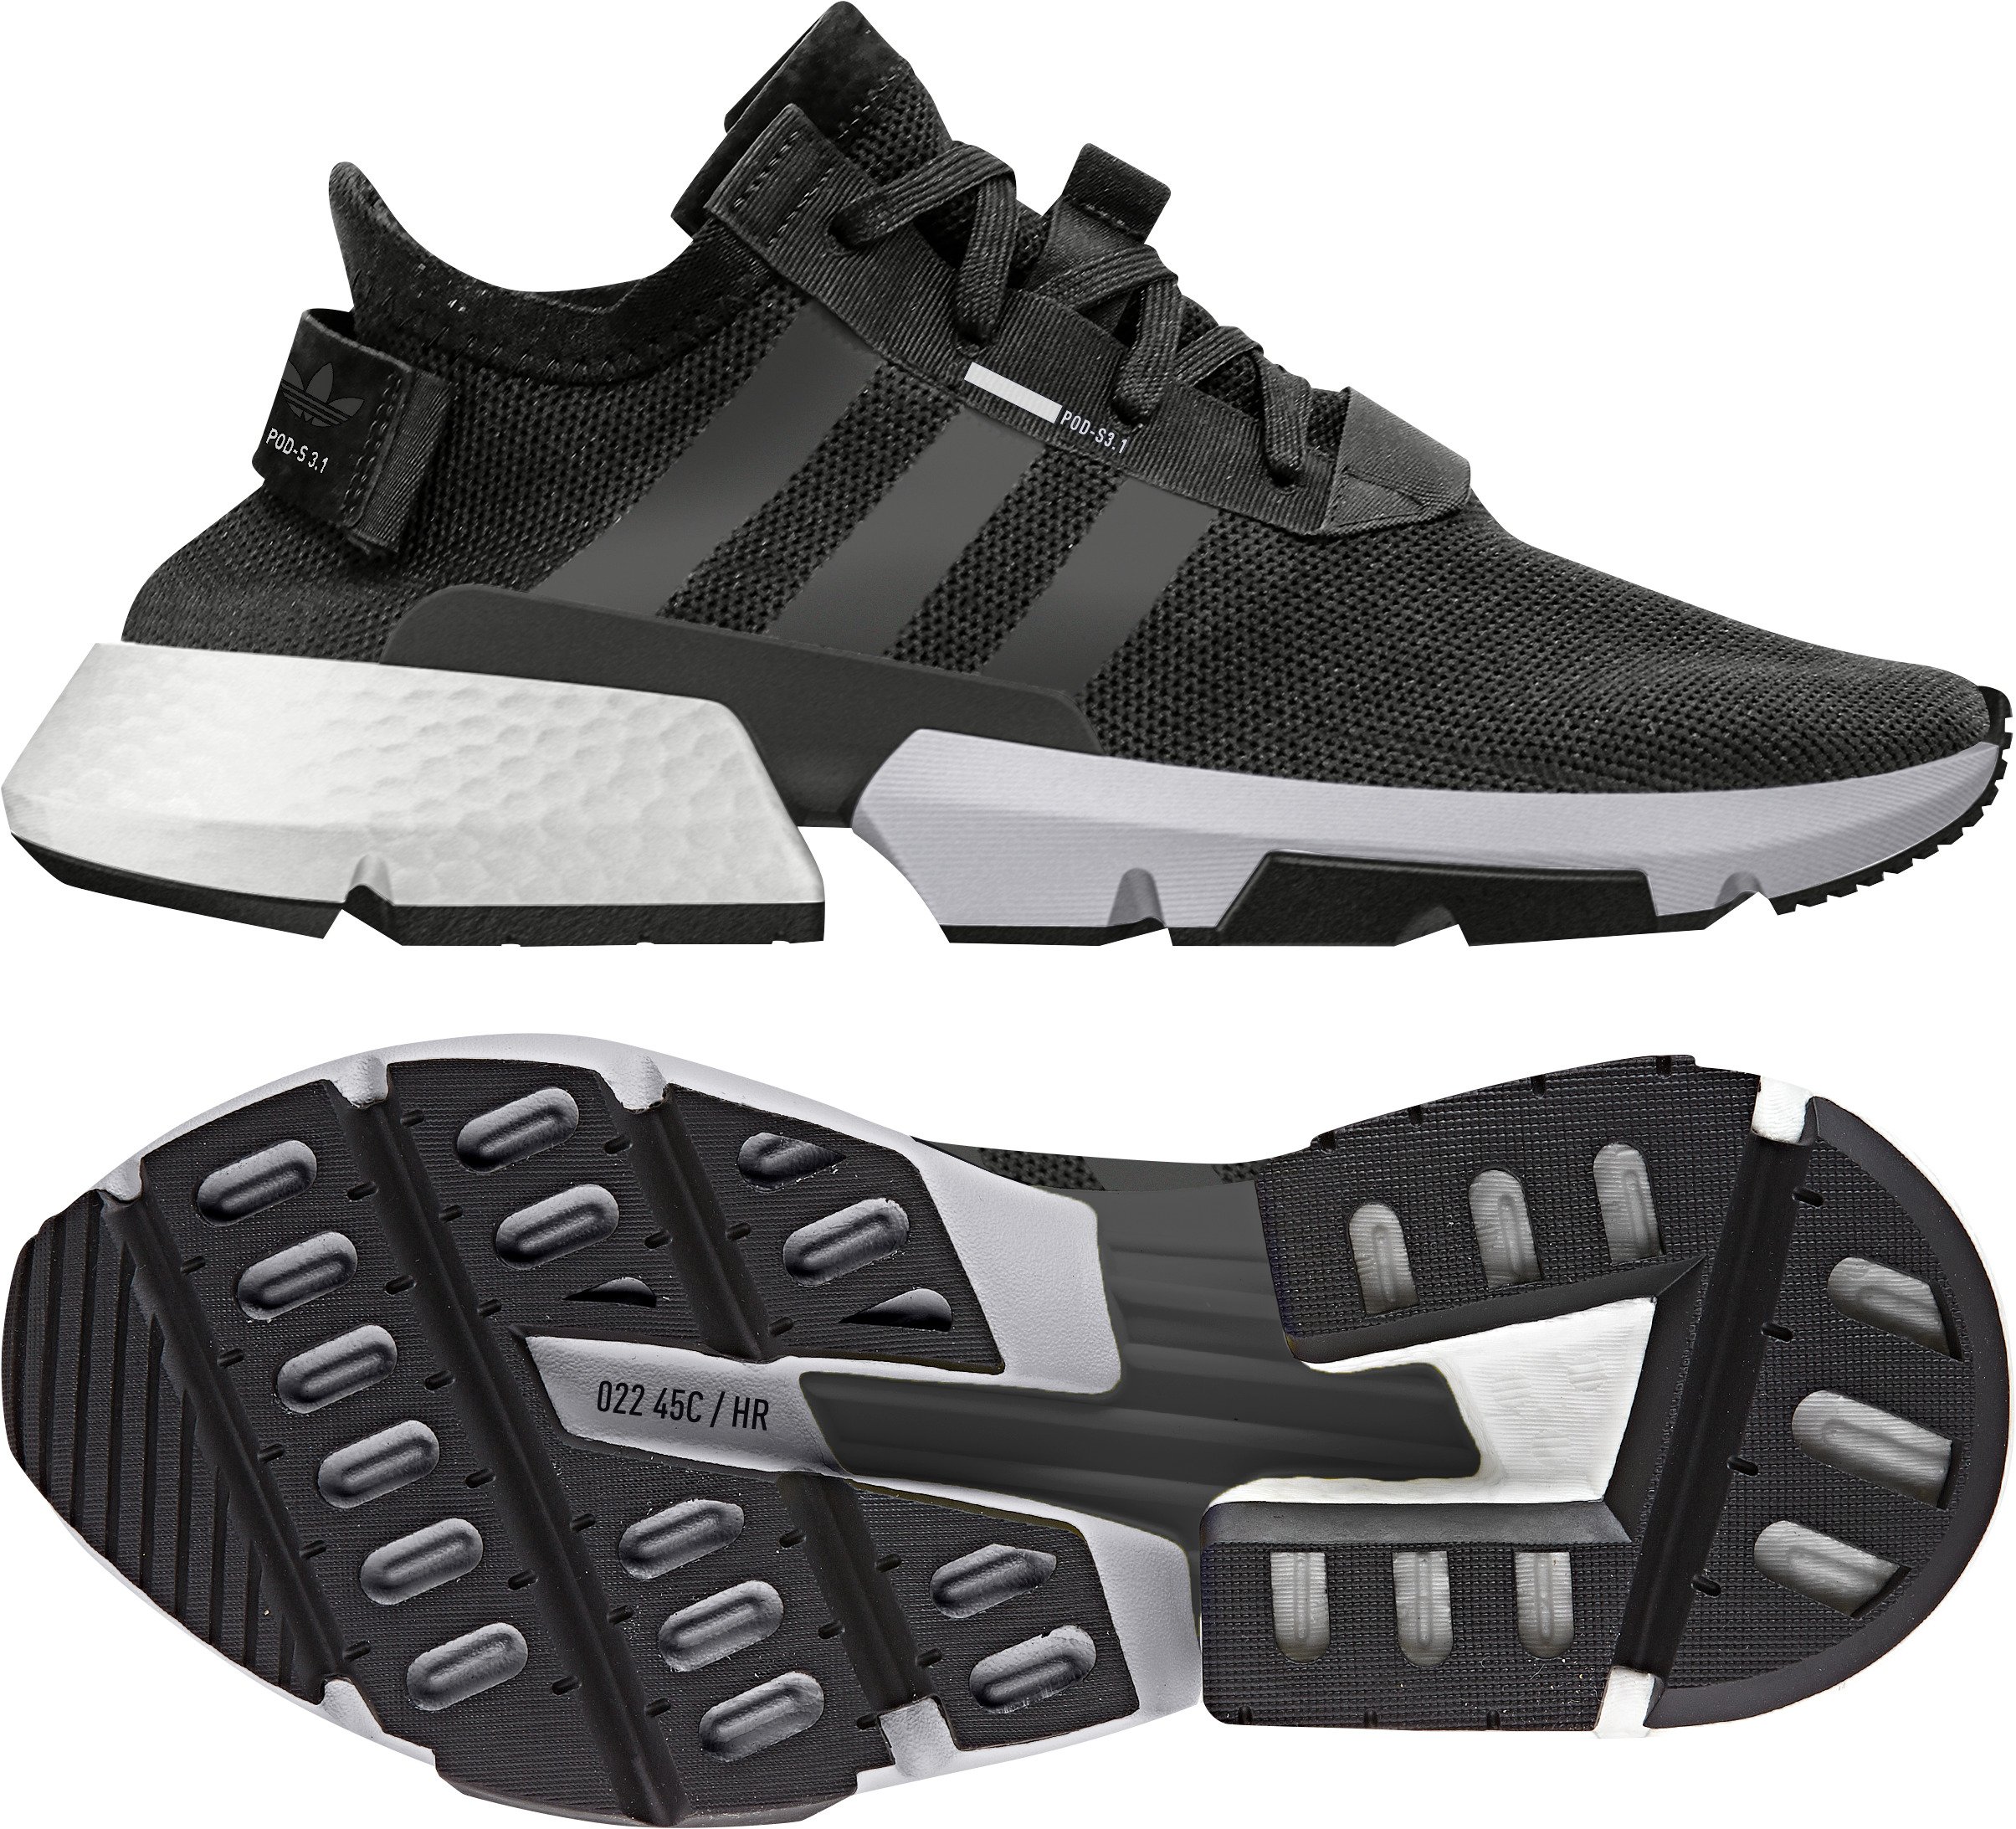 Rítmico Puede soportar amortiguar Mr Doveton on Twitter: "THE FUTURE STANDARD IN FOOTWEAR: adidas Originals  introduces the new P.O.D. System footwear concept. Read more about it here:  https://t.co/8erCIGf3i9 @adidasZA #PODSystem https://t.co/9oJuAfzzfr" /  Twitter